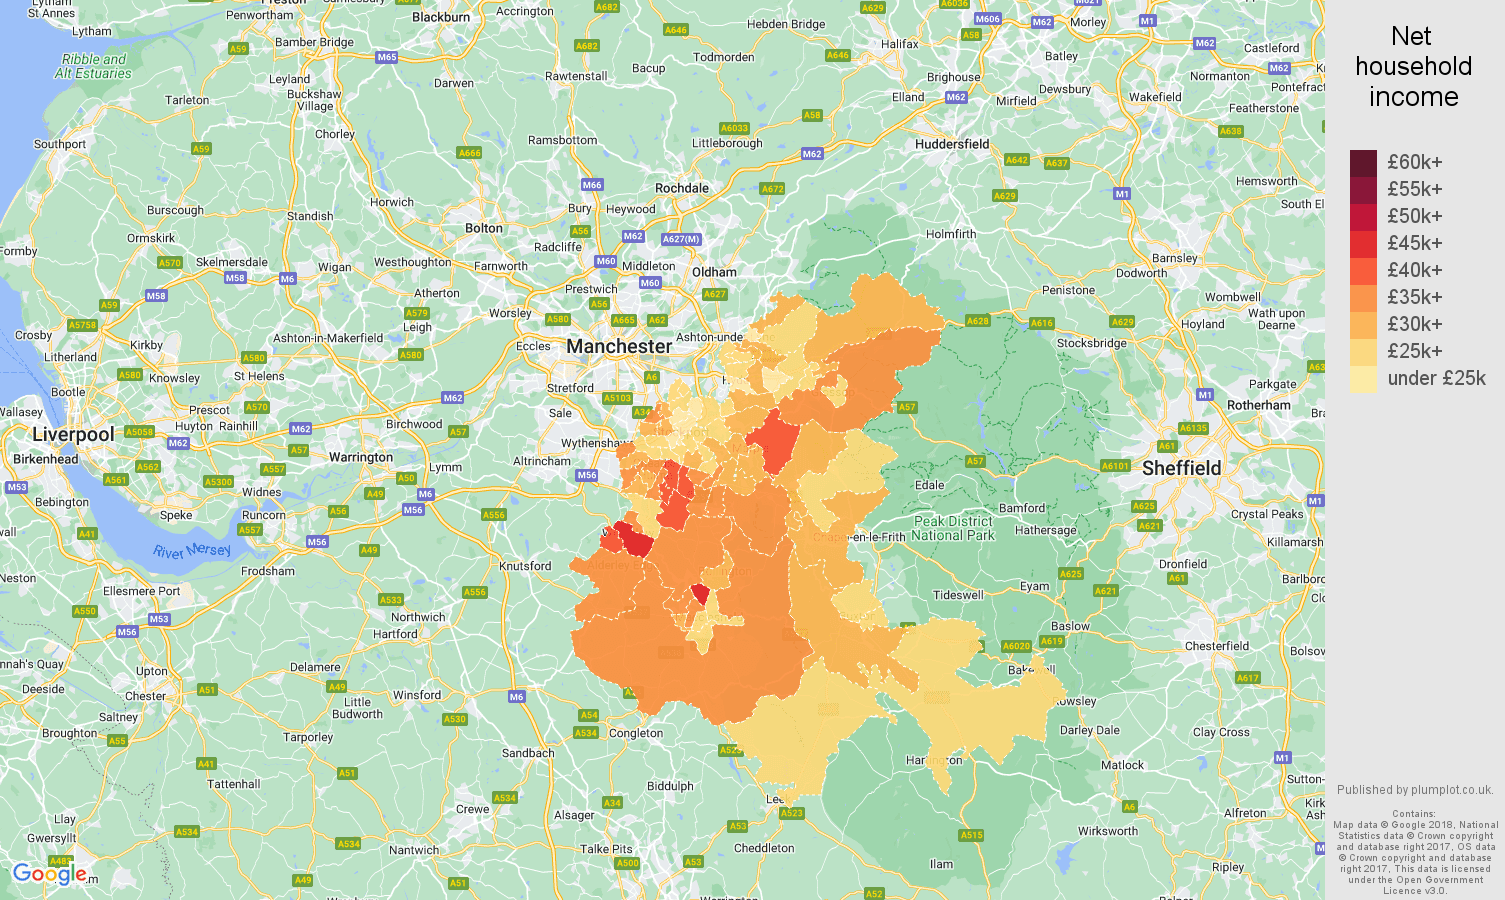 Stockport net household income map